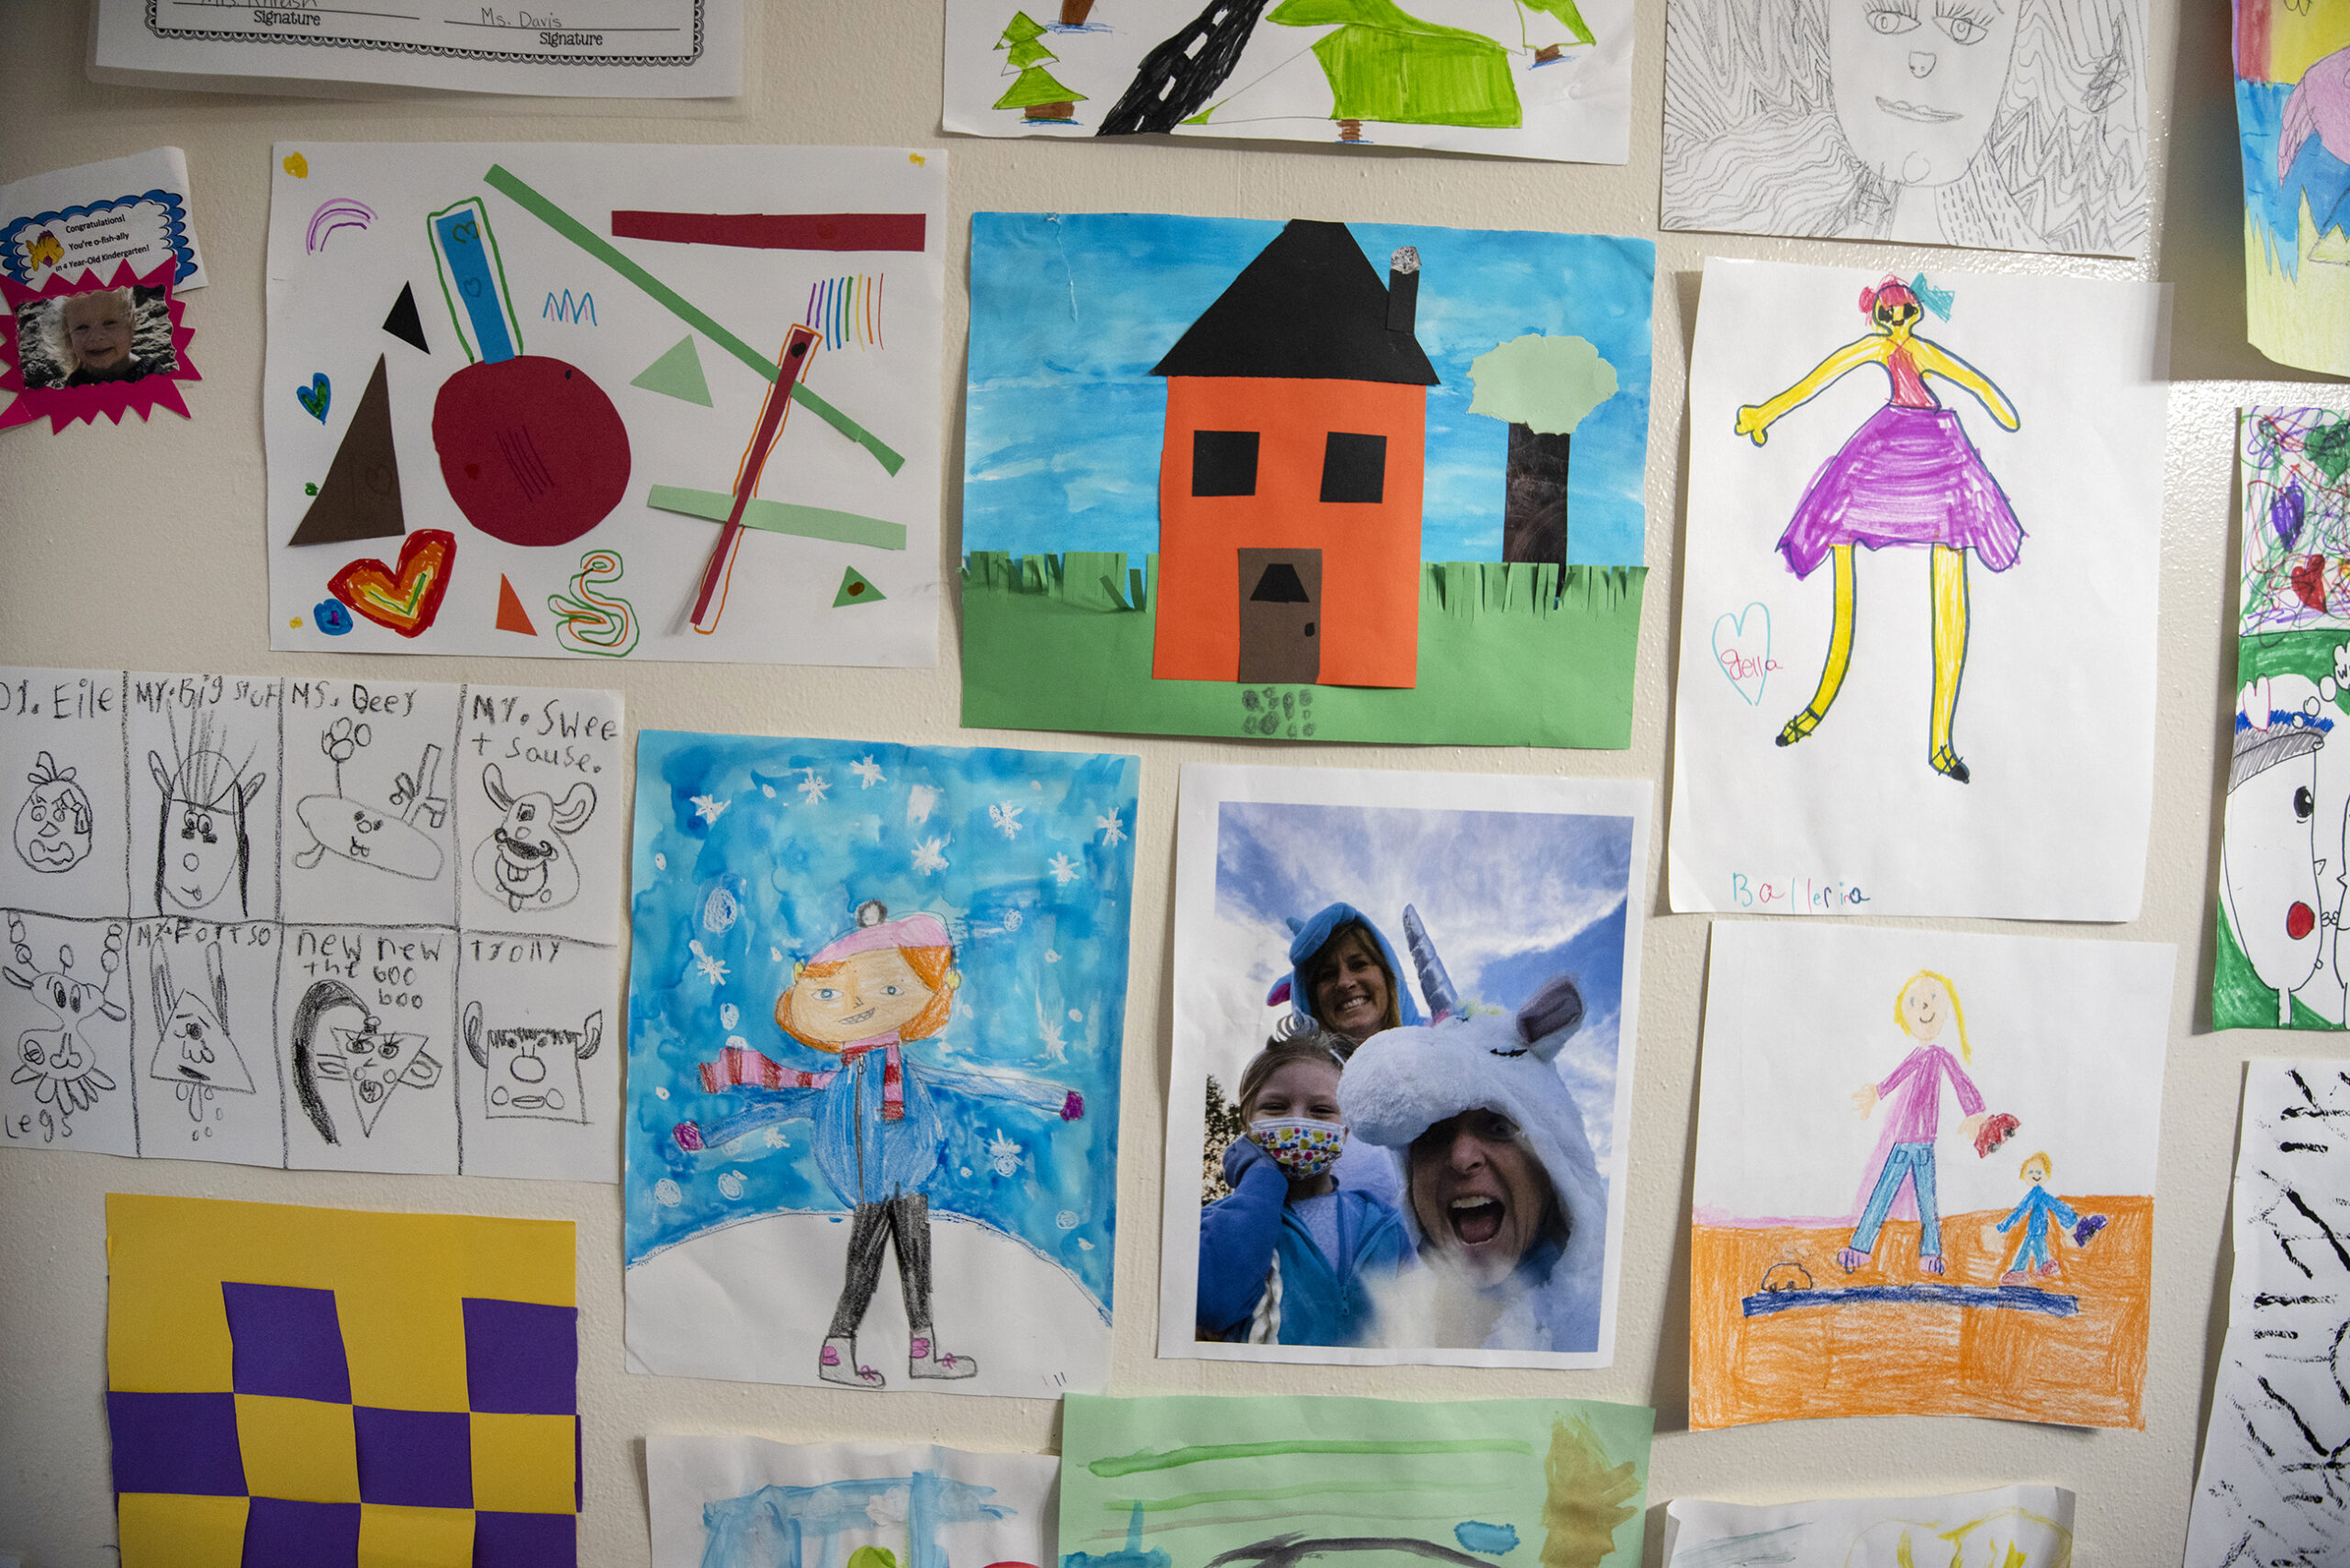 Colorful drawings and photographs are displayed on a wall.